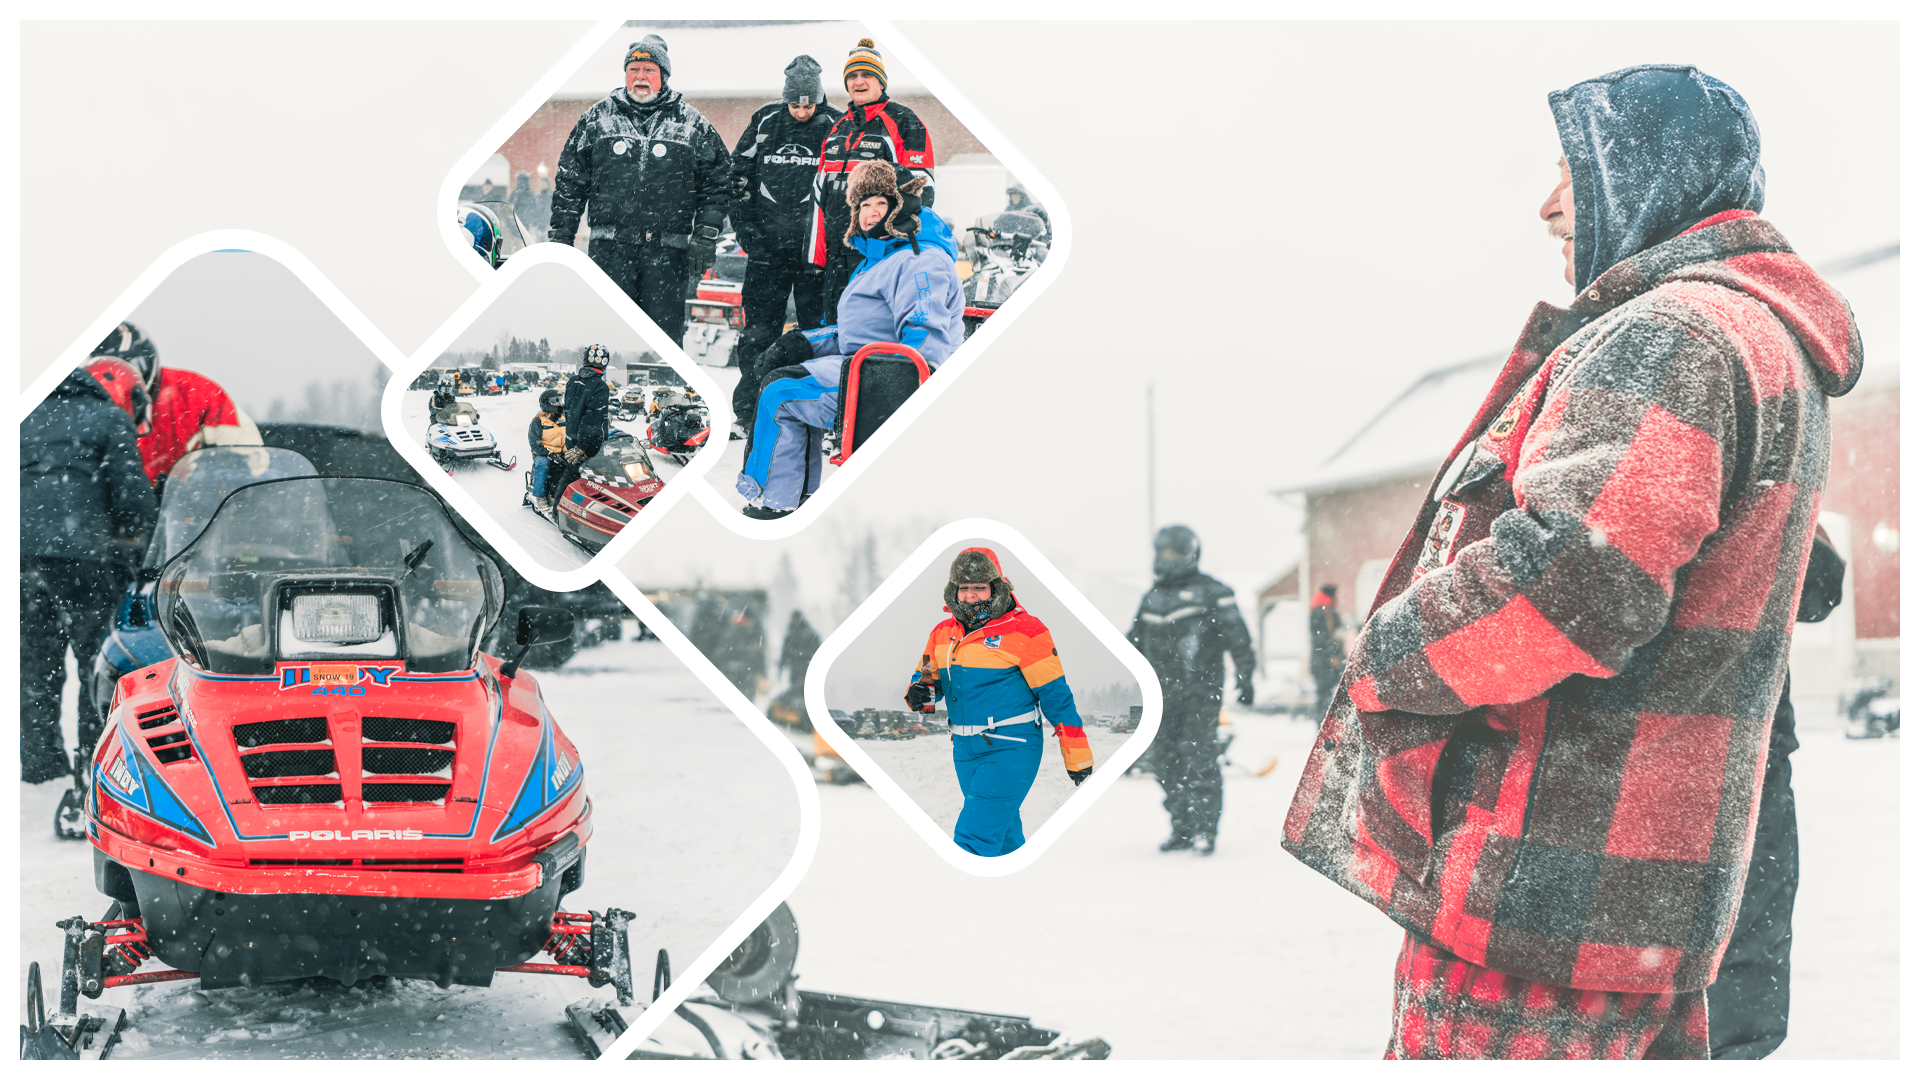 Enthusiasts of the Rapid River Relic Ride convene in a spirited meeting, surrounded by a backdrop of gleaming vintage snowmobiles. 